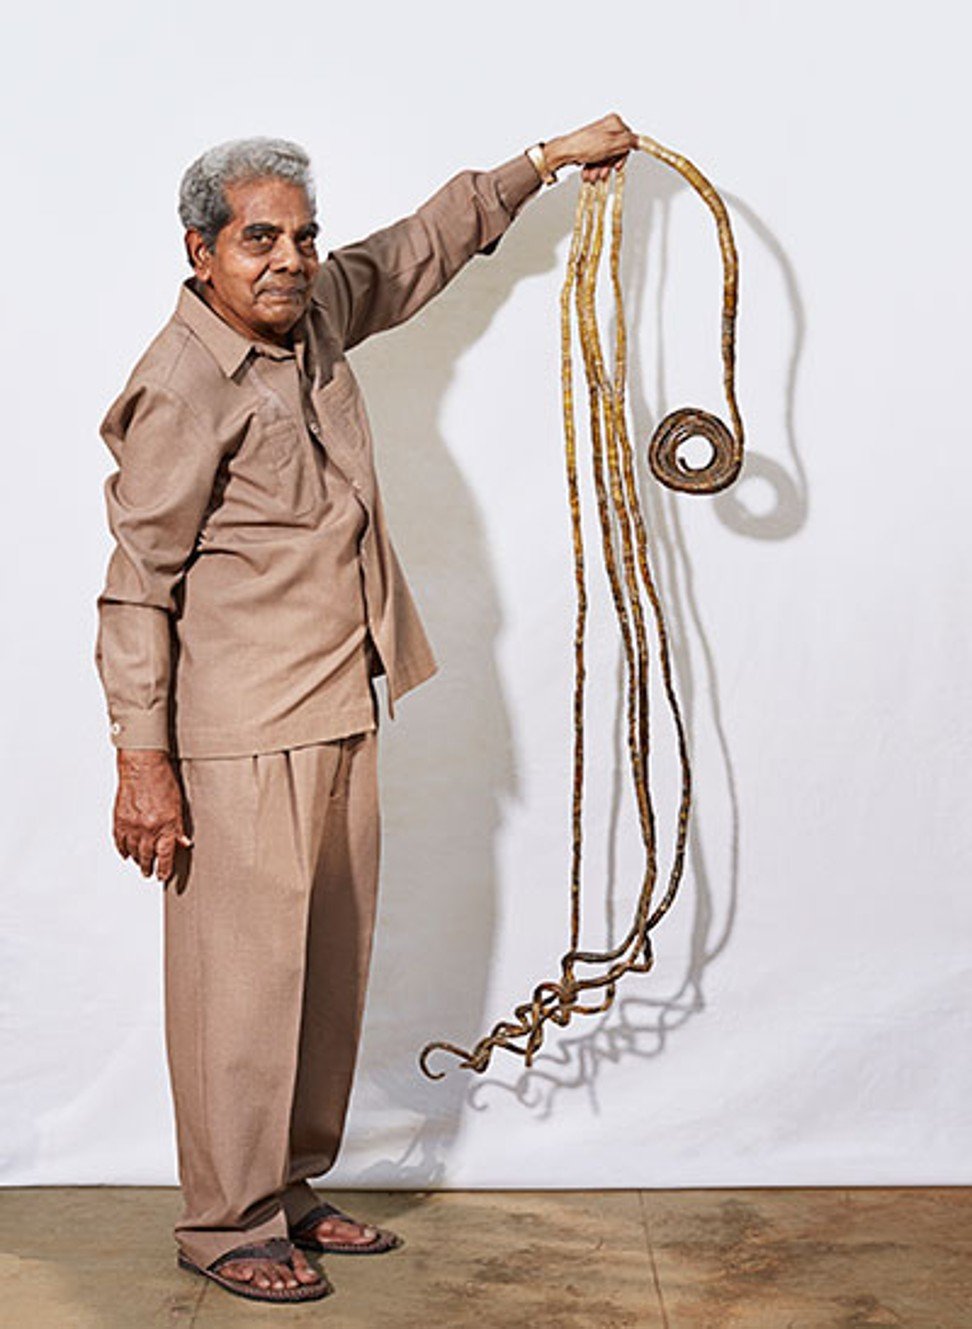 Guinness record holder Shridhar Chillal cuts world's longest nails in New  York after 66 years; hand permanently disabled – Firstpost